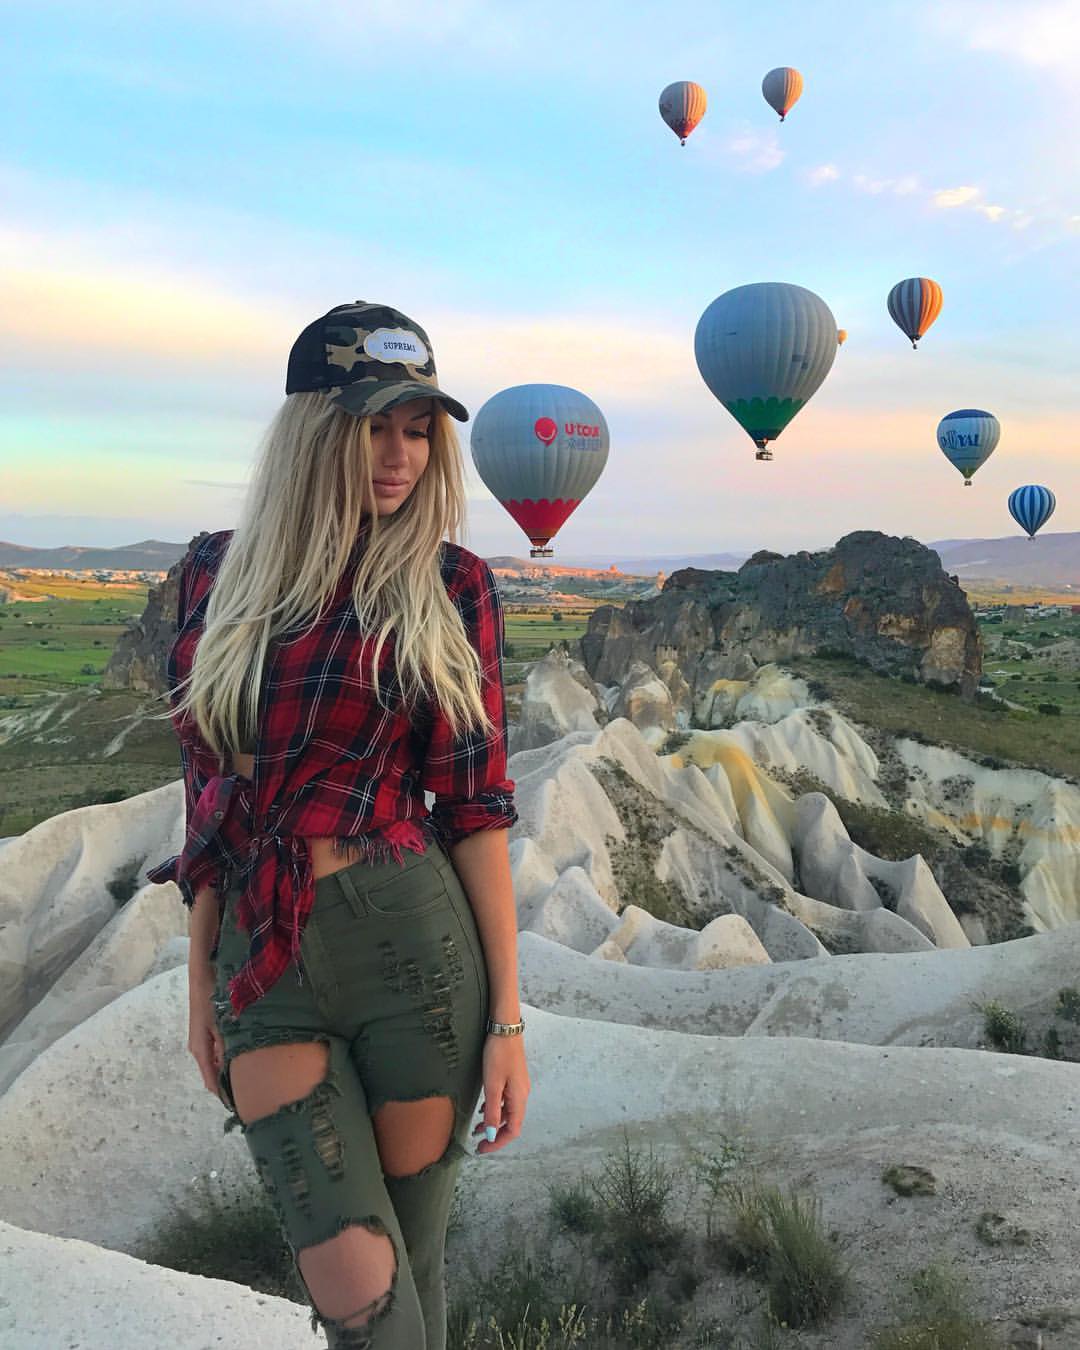 People 1080x1350 Anyuta Chernova photography women women outdoors Russian women Russian model model blonde face closed eyes sky clouds jeans hot air balloons mountains hat torn clothes